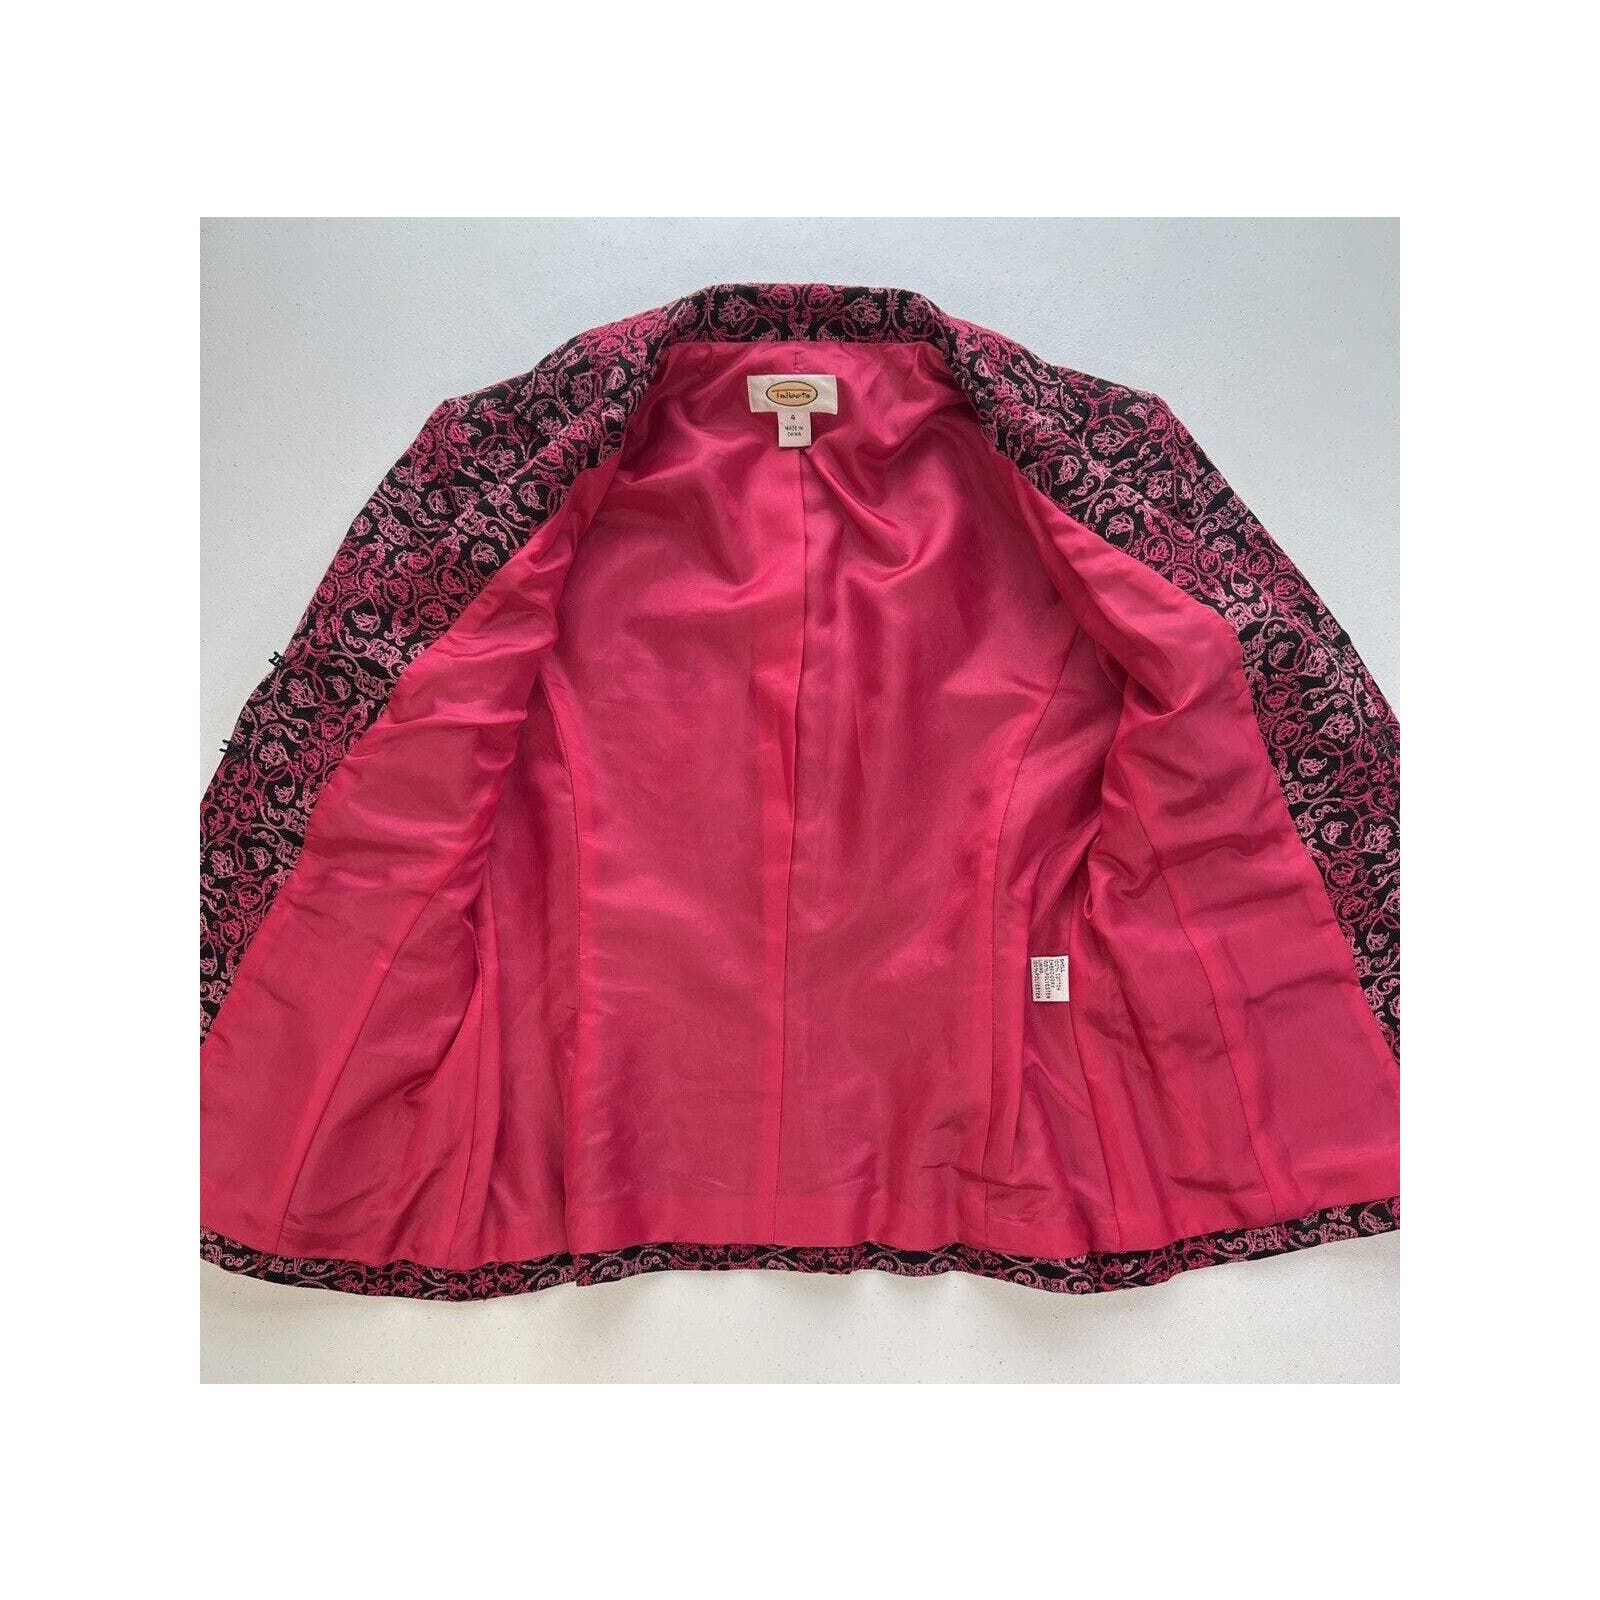 Talbots Blazer Women’s Size 4 Career Jacket Embroidered Lined Black And Pink